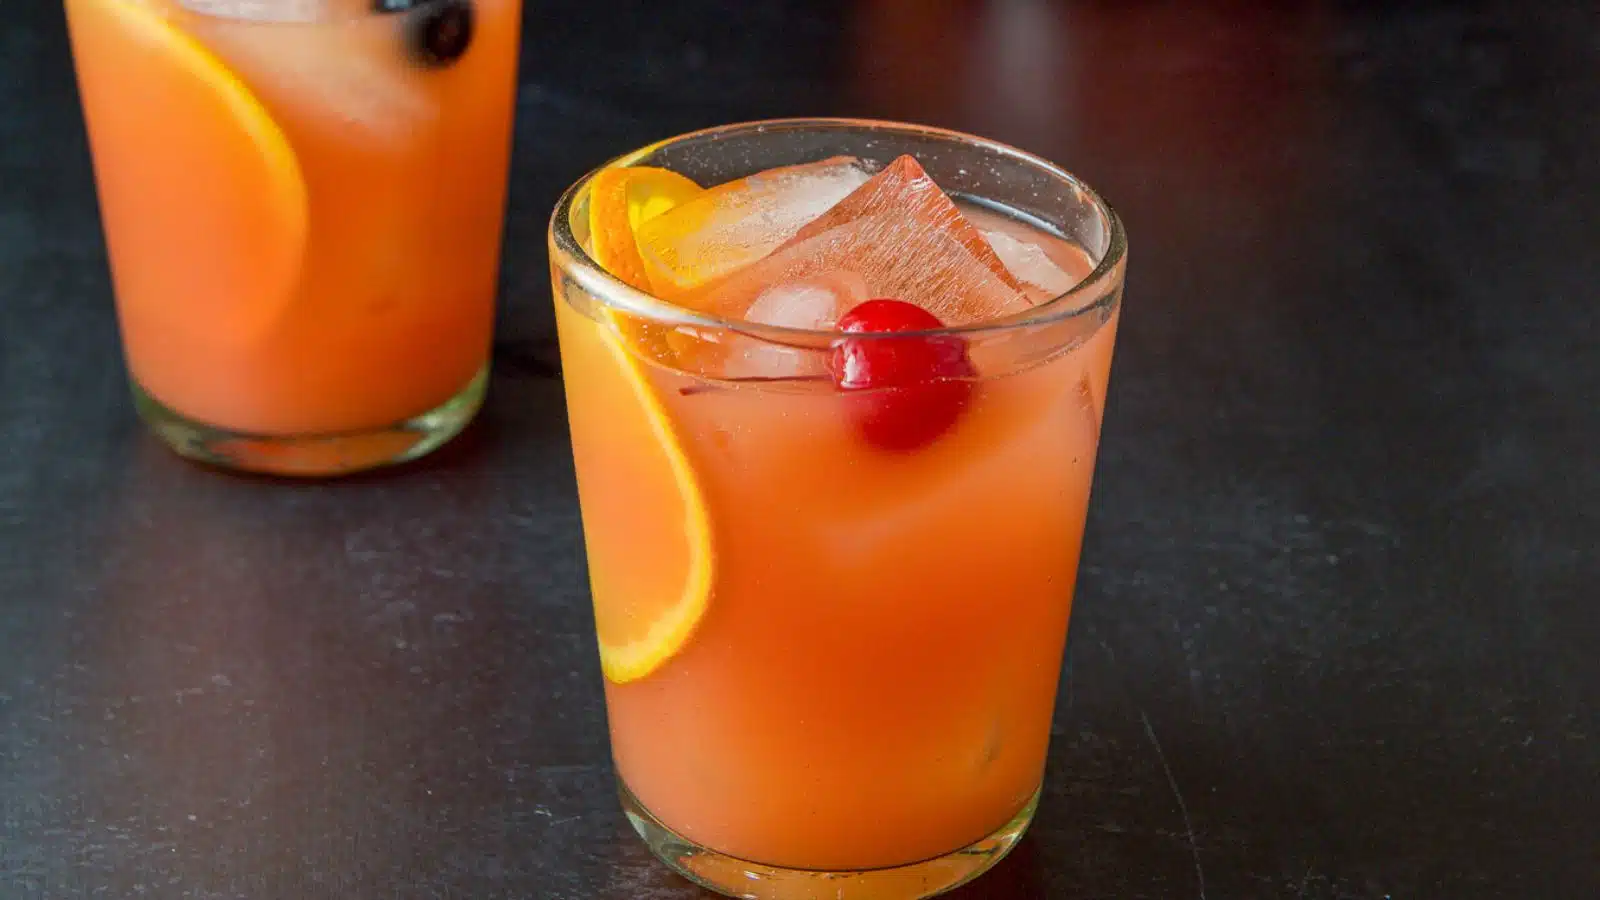 Two glasses with the orange-red cocktail with cherries and orange wheels as garnish